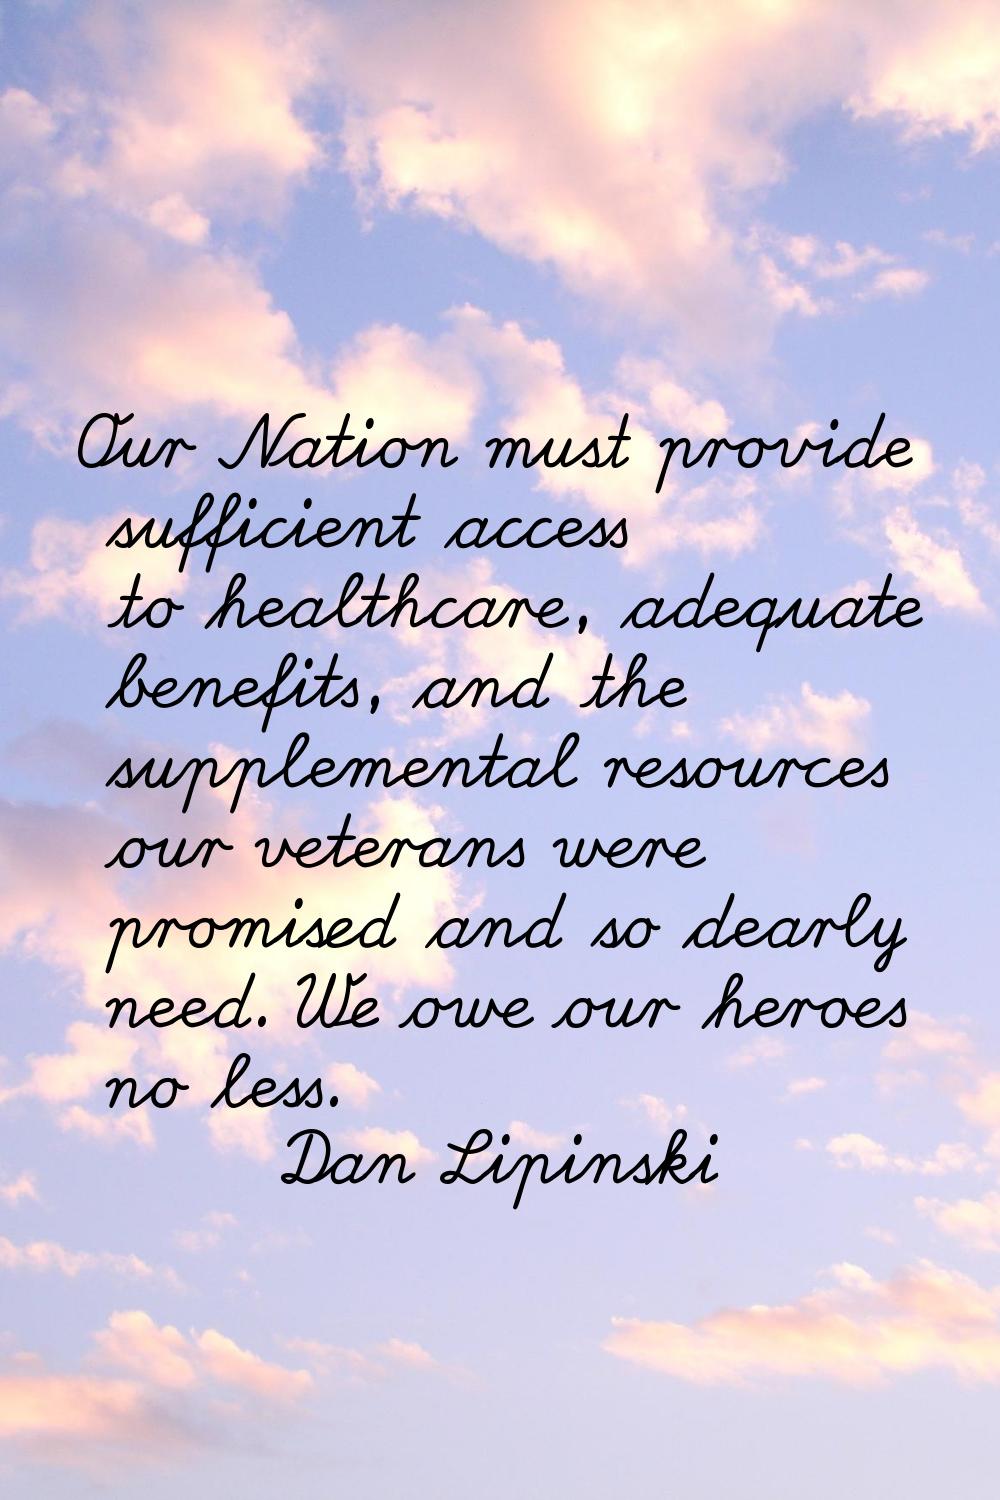 Our Nation must provide sufficient access to healthcare, adequate benefits, and the supplemental re